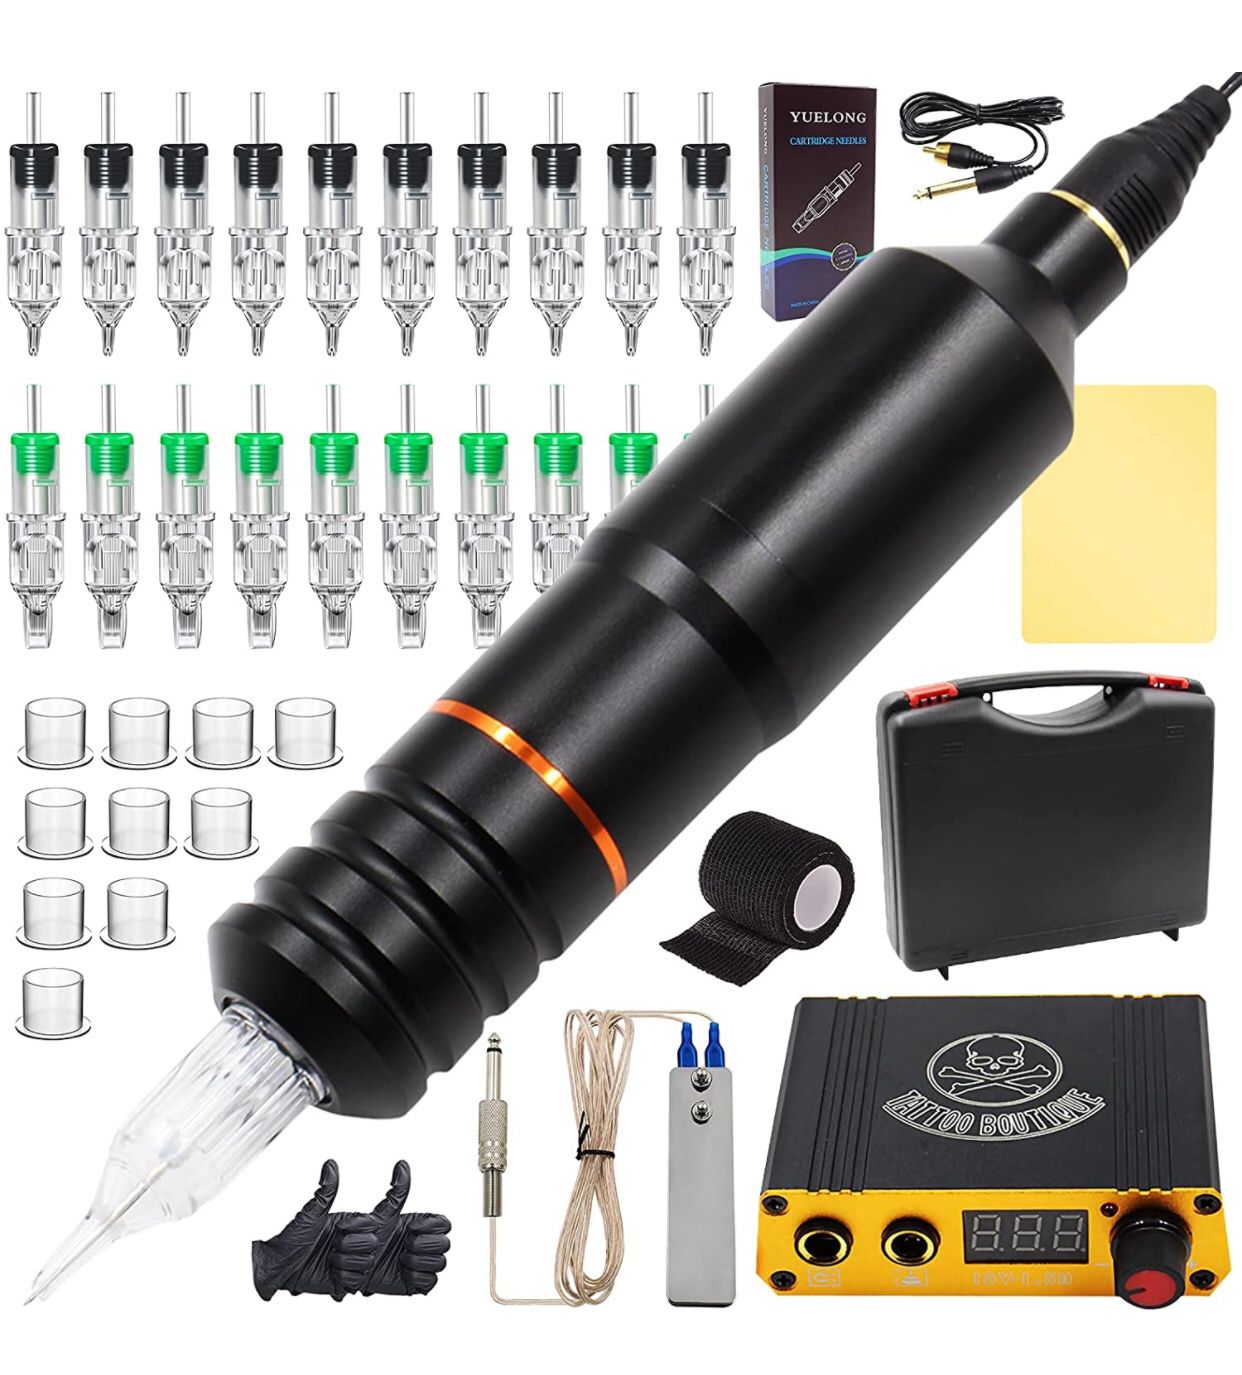 Tattoo Pen Kit, Rotary Tattoo Pen Machine Kit Tattoo Pen Power Supply 20 Mixed Cartridges Needles Foot Pedal Clip Cord Power Cable Practice Skin Ink 